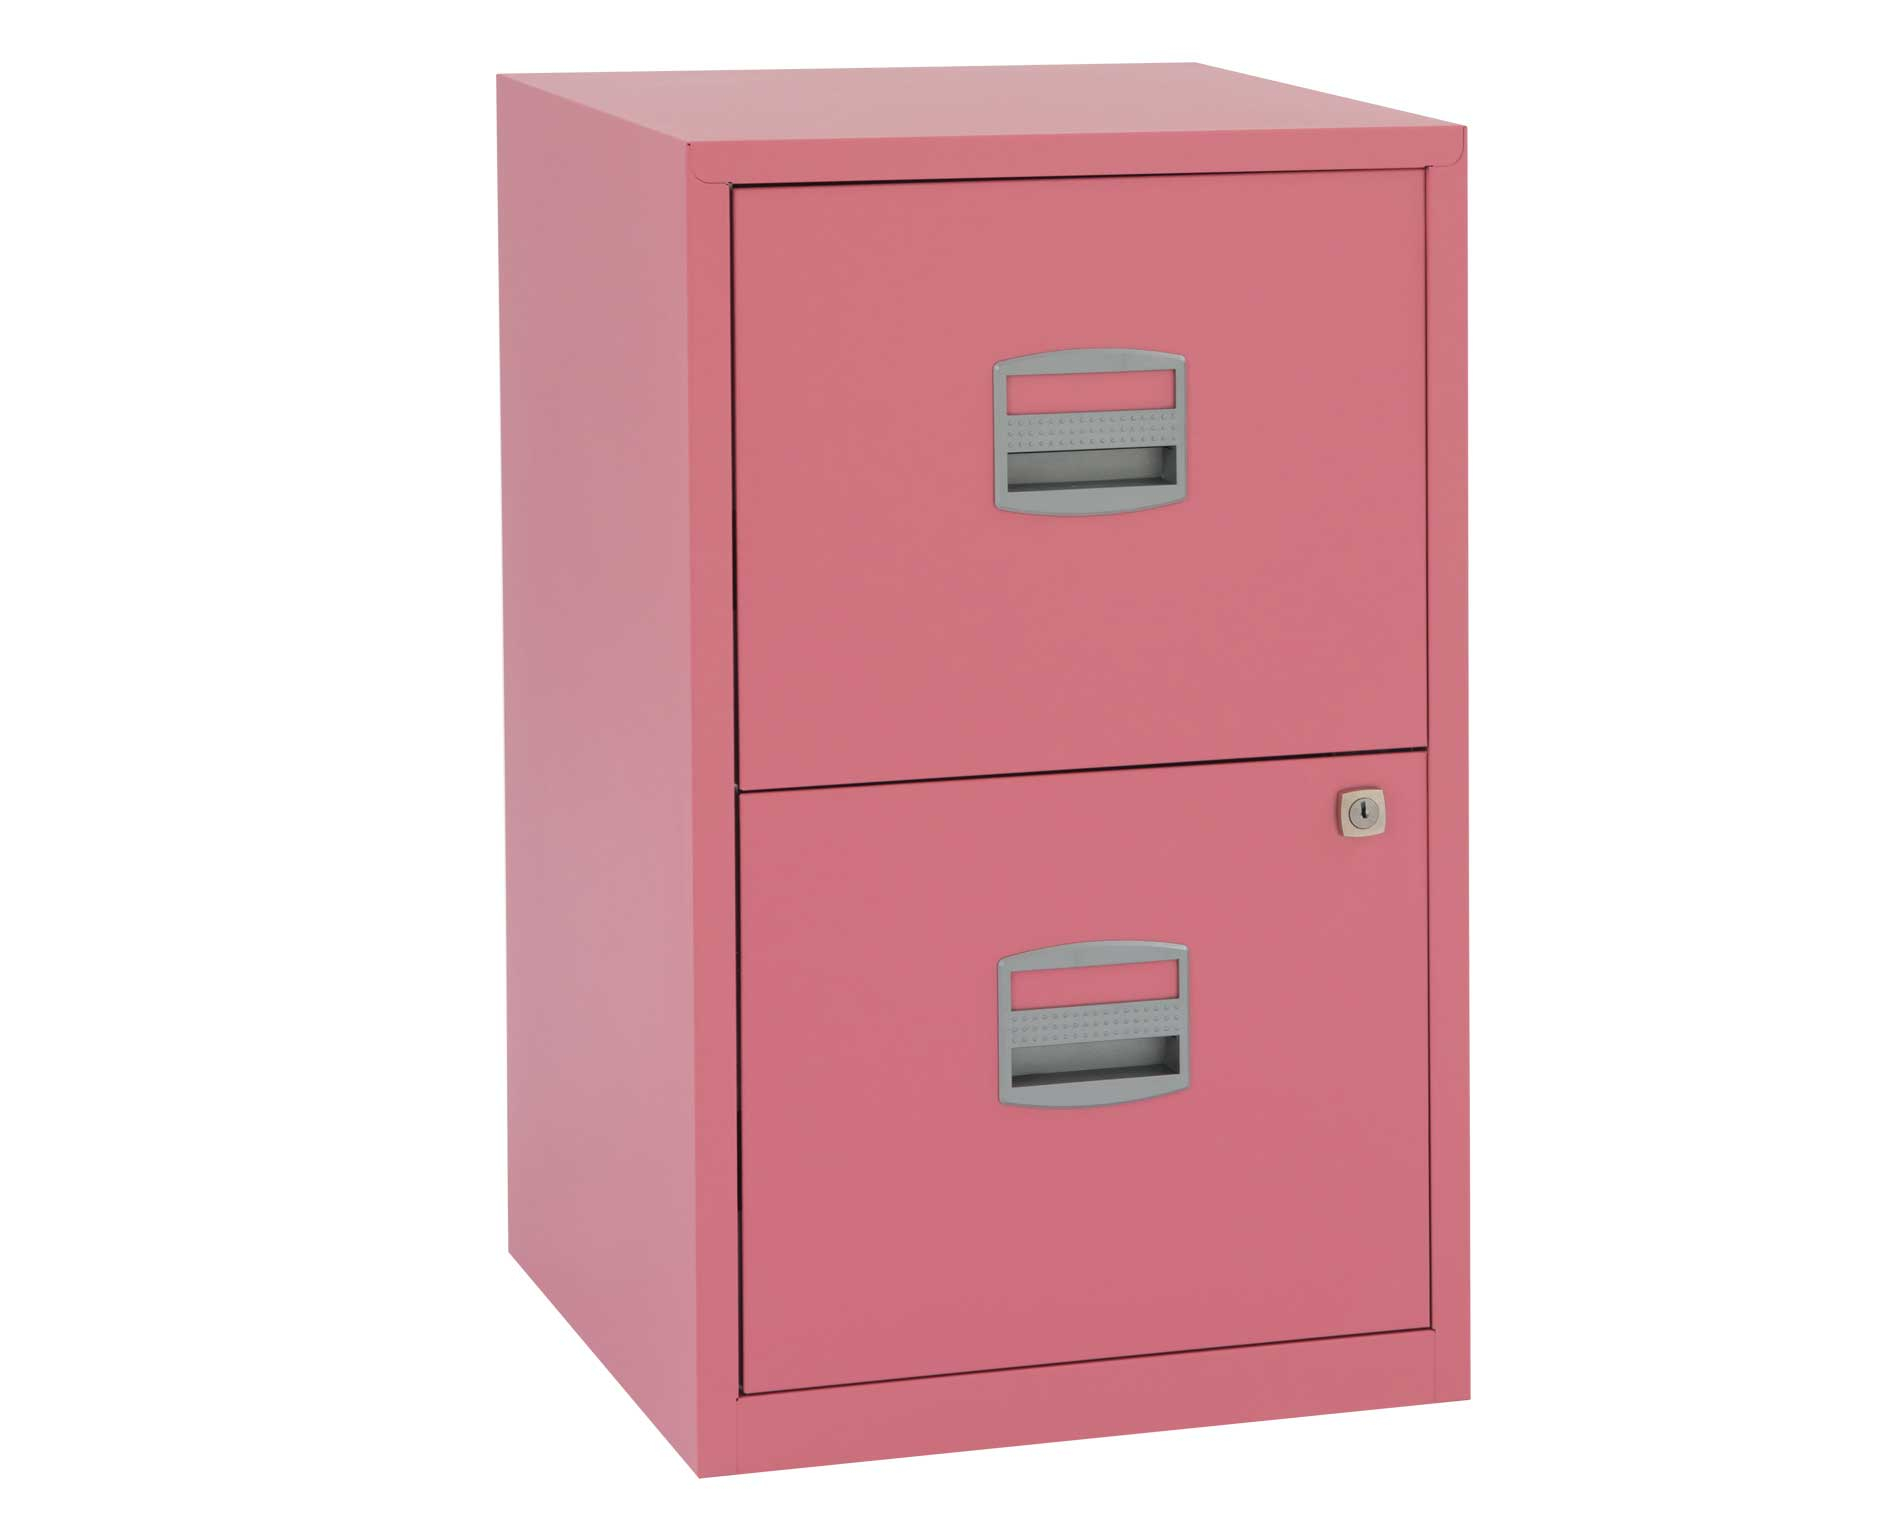 Pink Filing Cabinets Storage Shelving Furniture Storage Ryman intended for measurements 1890 X 1540